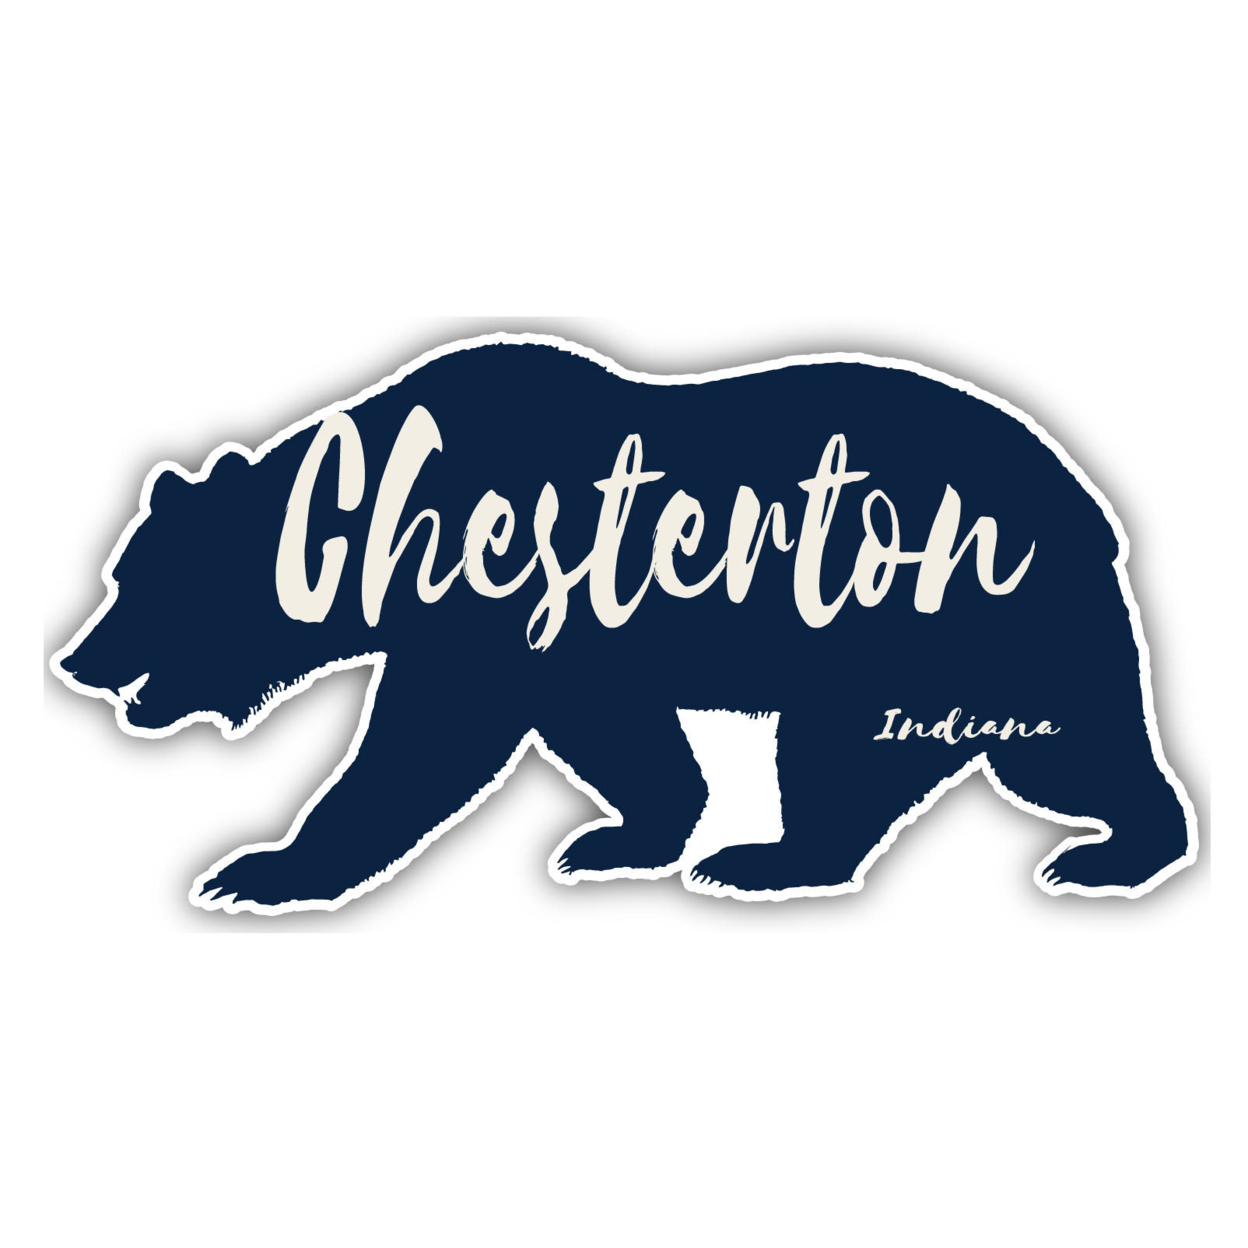 Chesterton Indiana Souvenir Decorative Stickers (Choose Theme And Size) - 4-Pack, 8-Inch, Tent